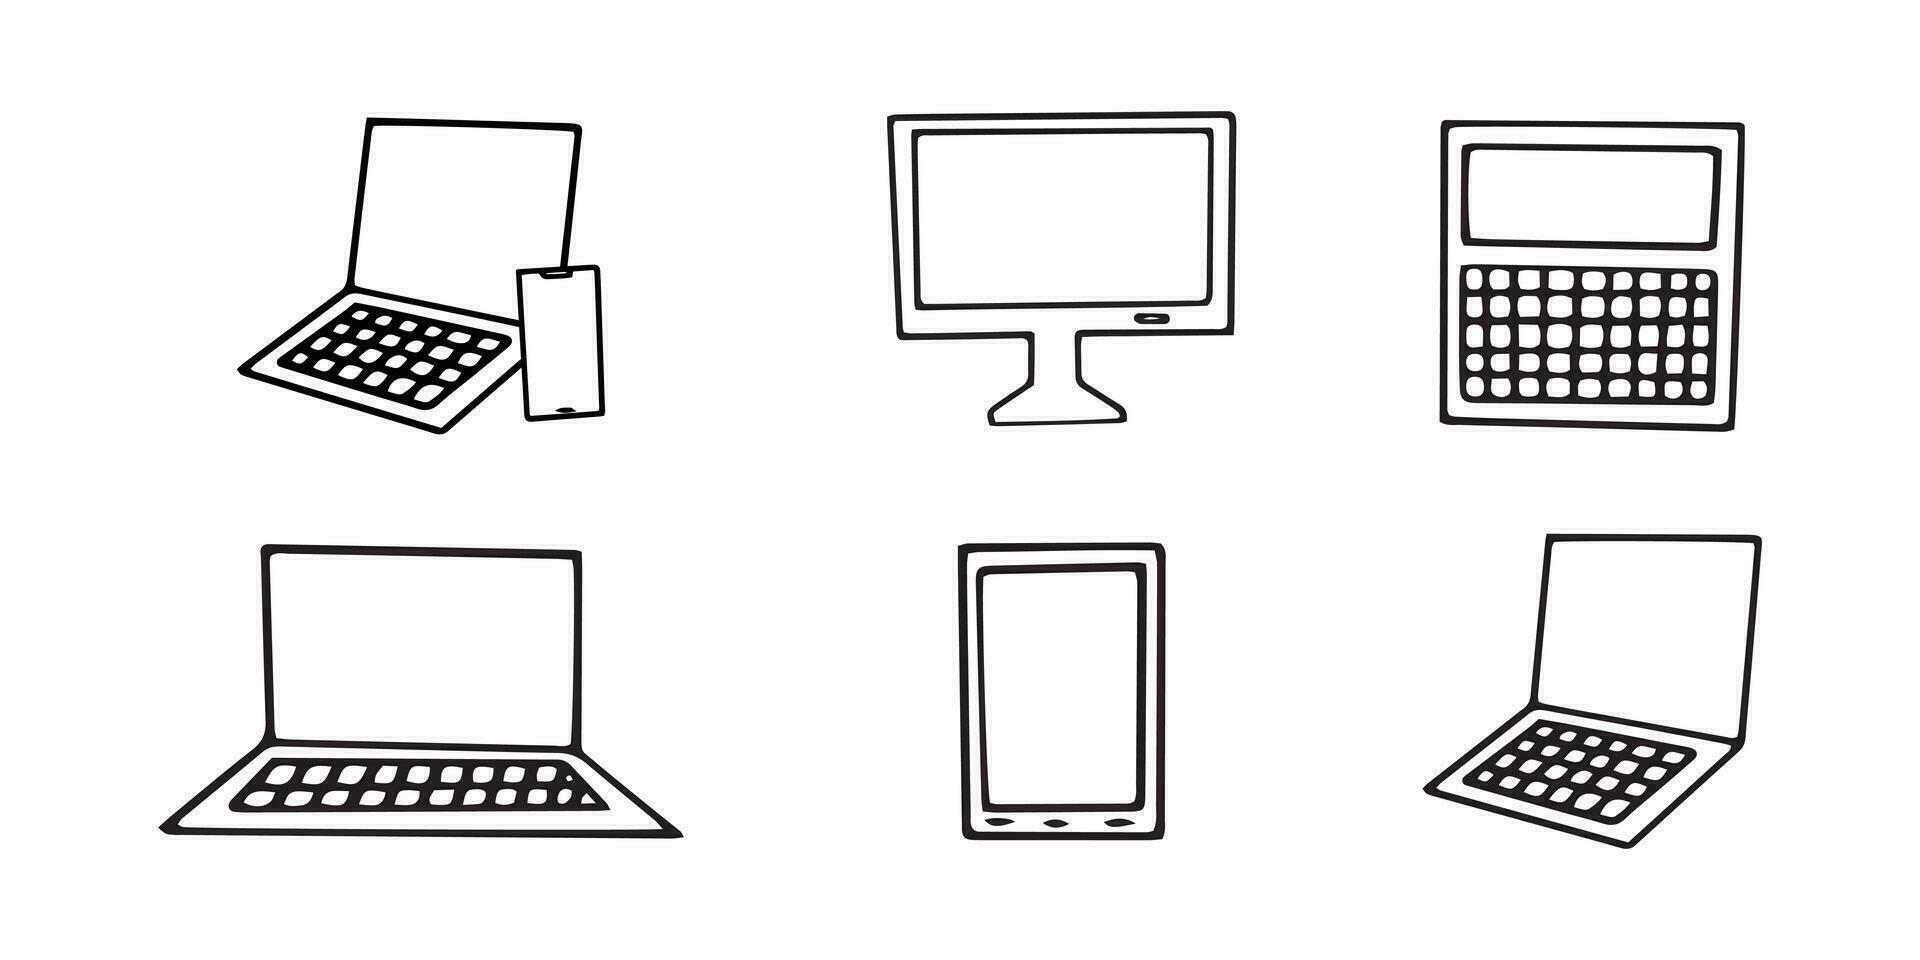 Laptop and gadget hand drawn illustration vector